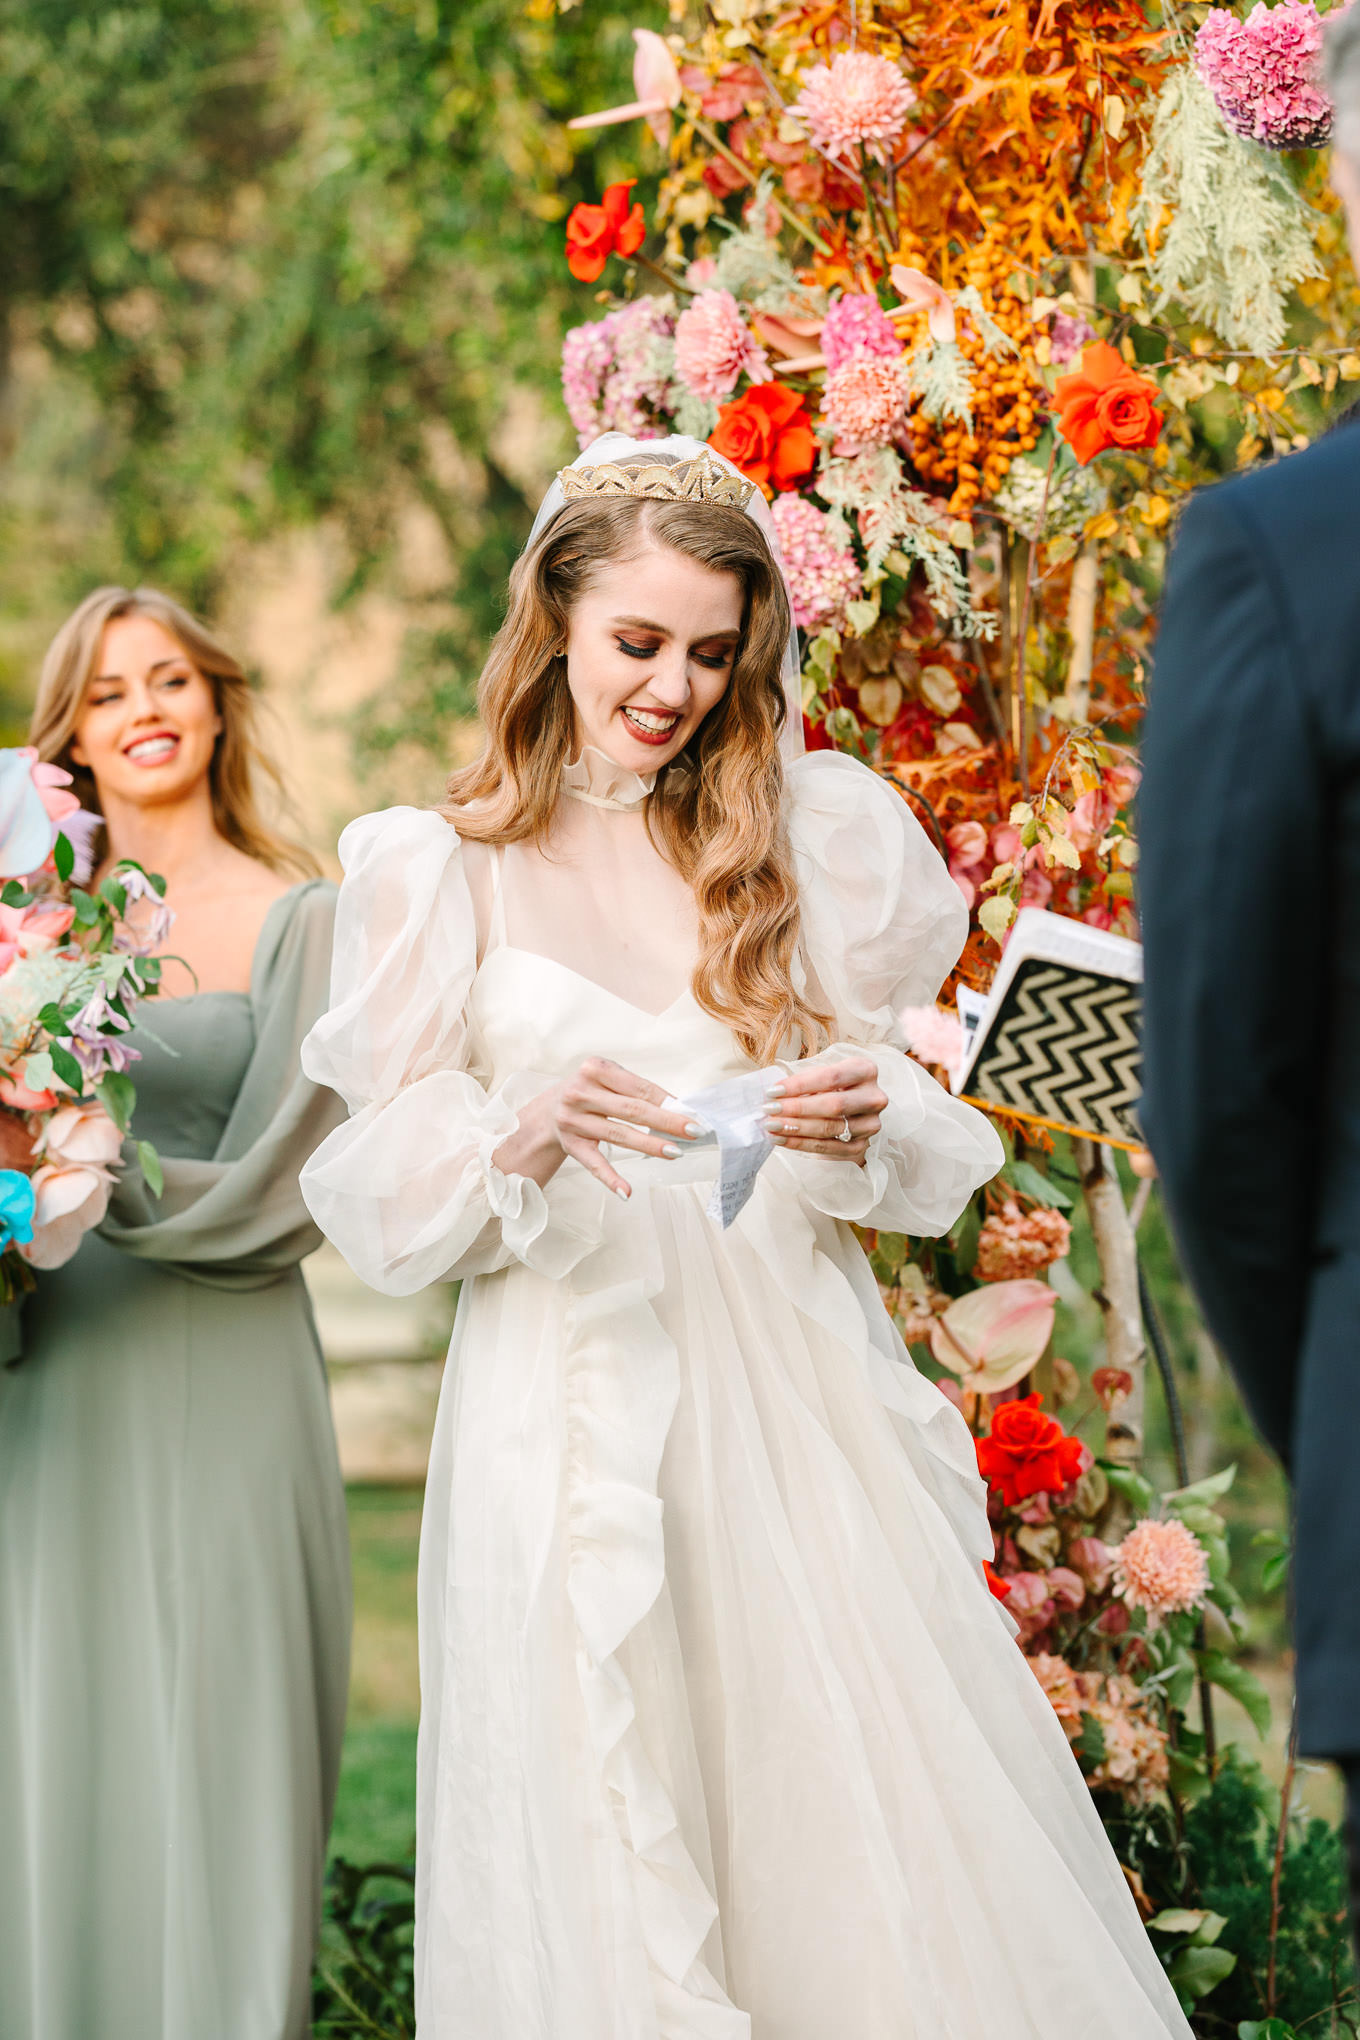 Bride reading wedding vows | Colorful and quirky wedding at Higuera Ranch in San Luis Obispo | #sanluisobispowedding #californiawedding #higueraranch #madonnainn   
Source: Mary Costa Photography | Los Angeles